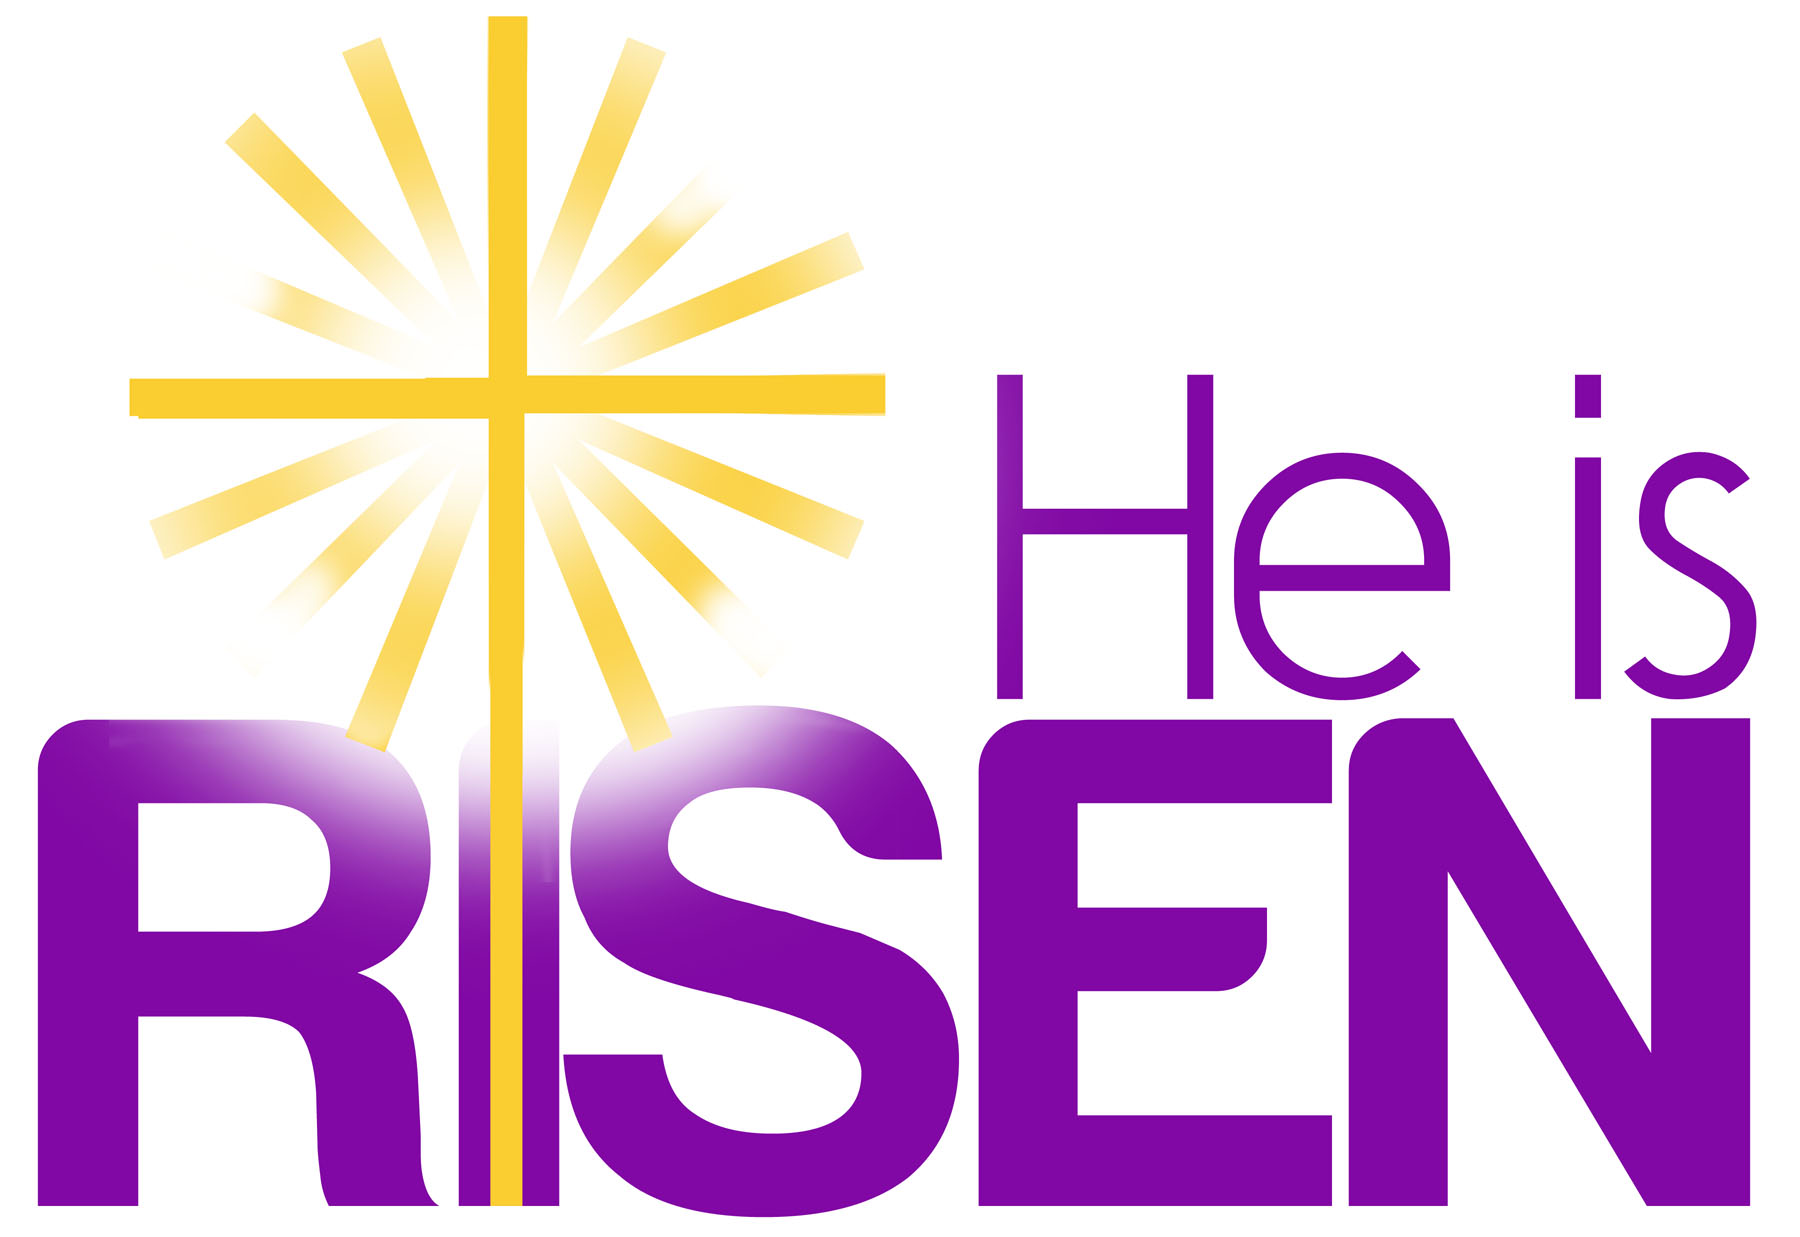 Images of Religious Easter Pictures - Jefney